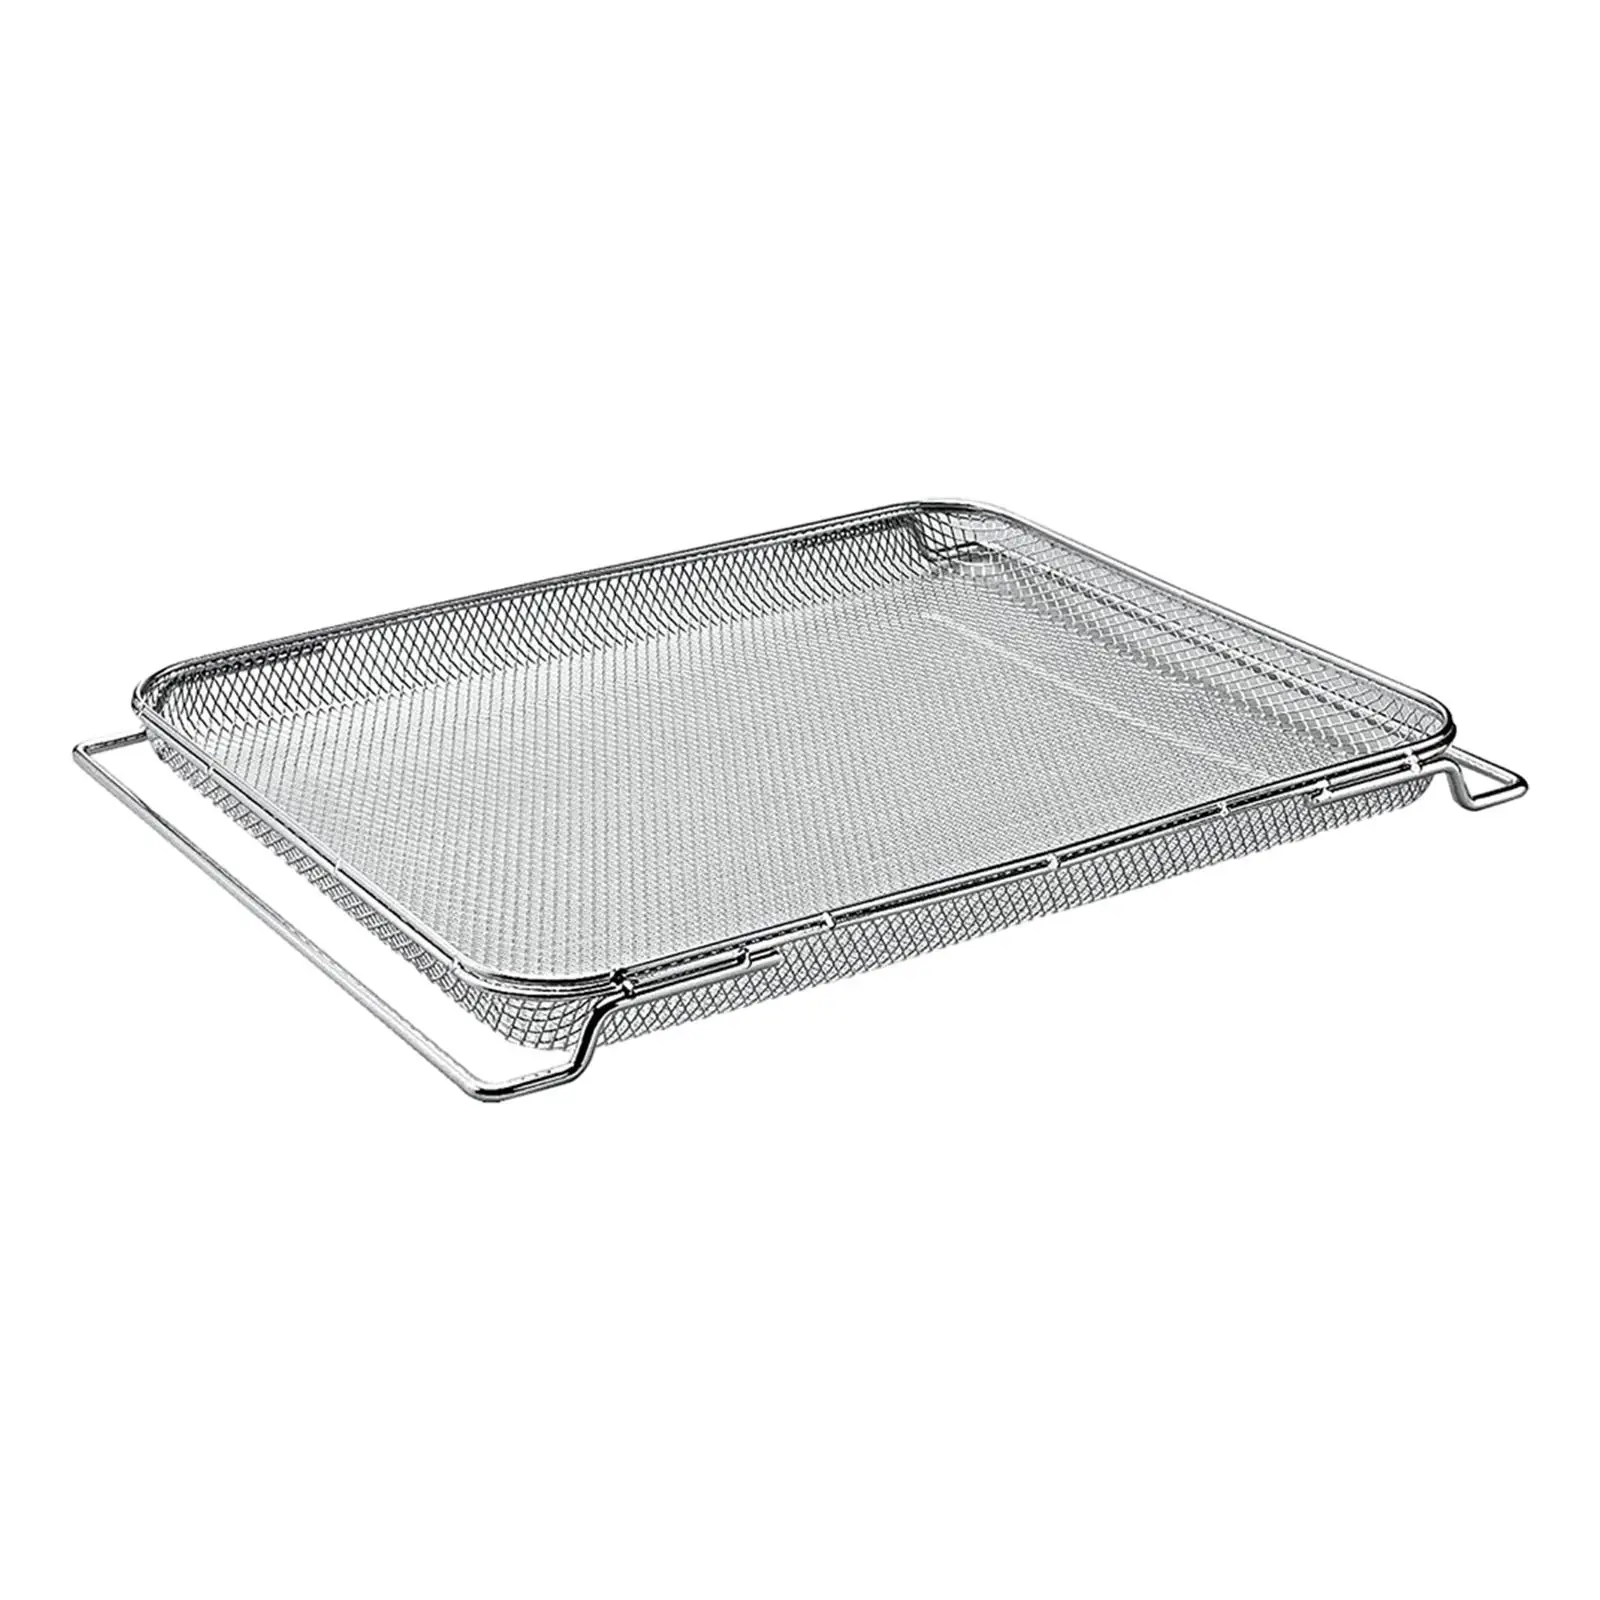 Oven Grill Mesh Replacement Basket with Handles 36.7cmx28.6cm Grill Mesh Basket Oven Baking Tray for Bread Fries Bacons